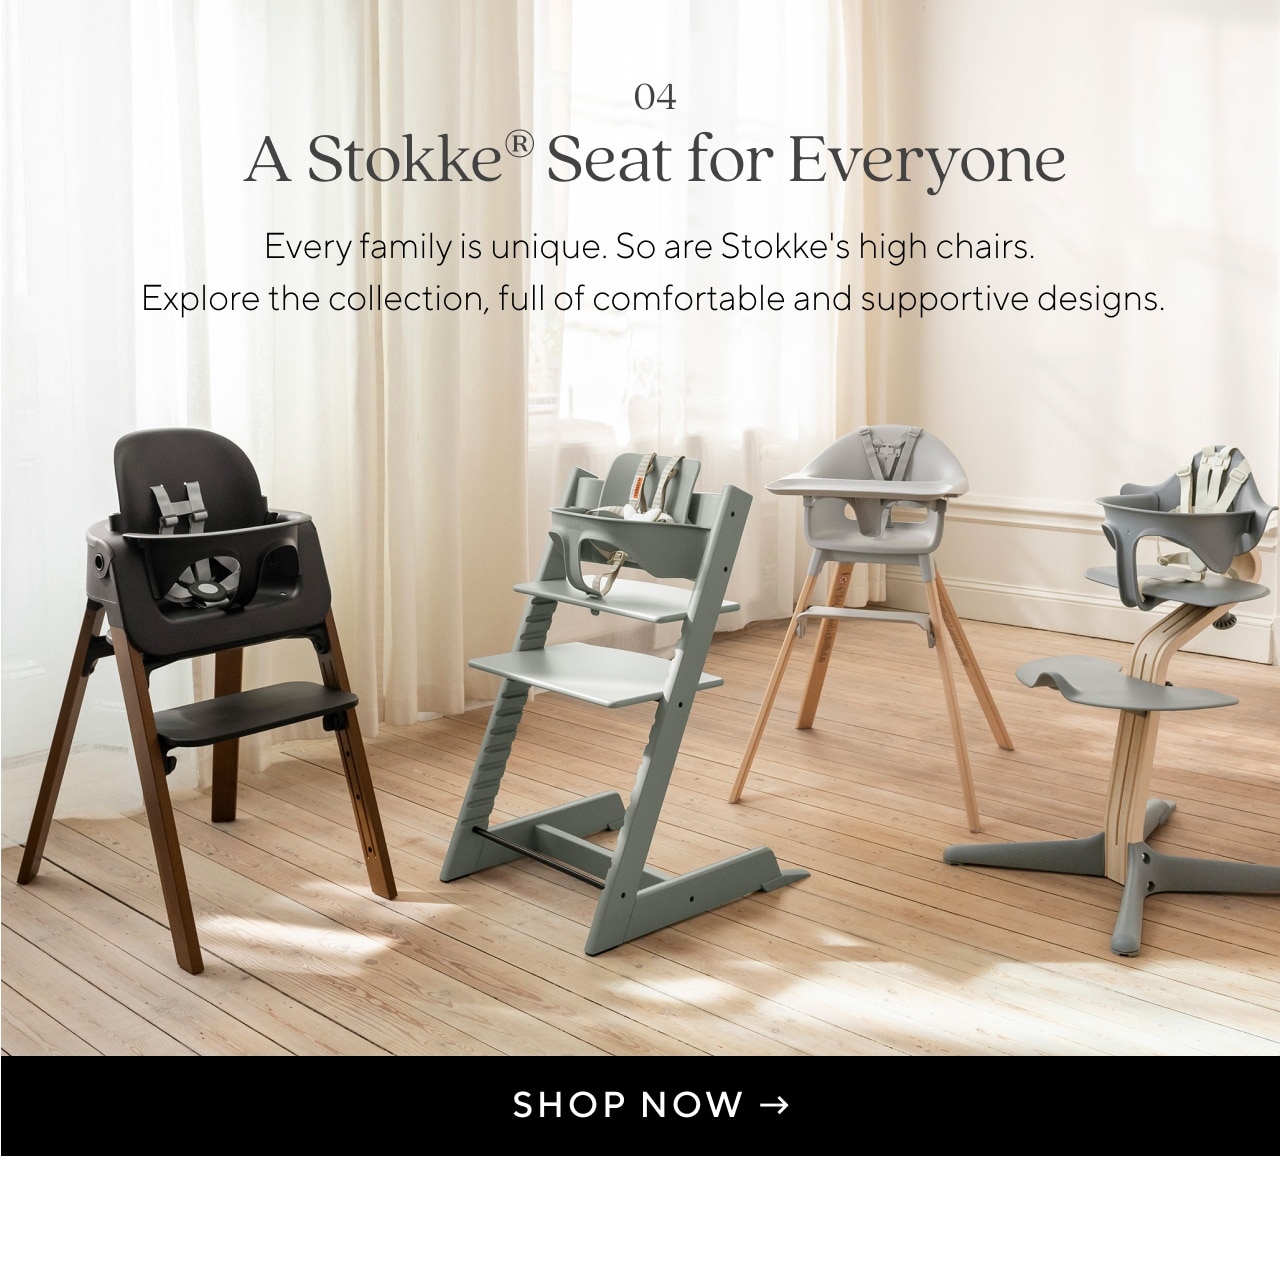 A STOKKE SEAT FOR EVERYONE